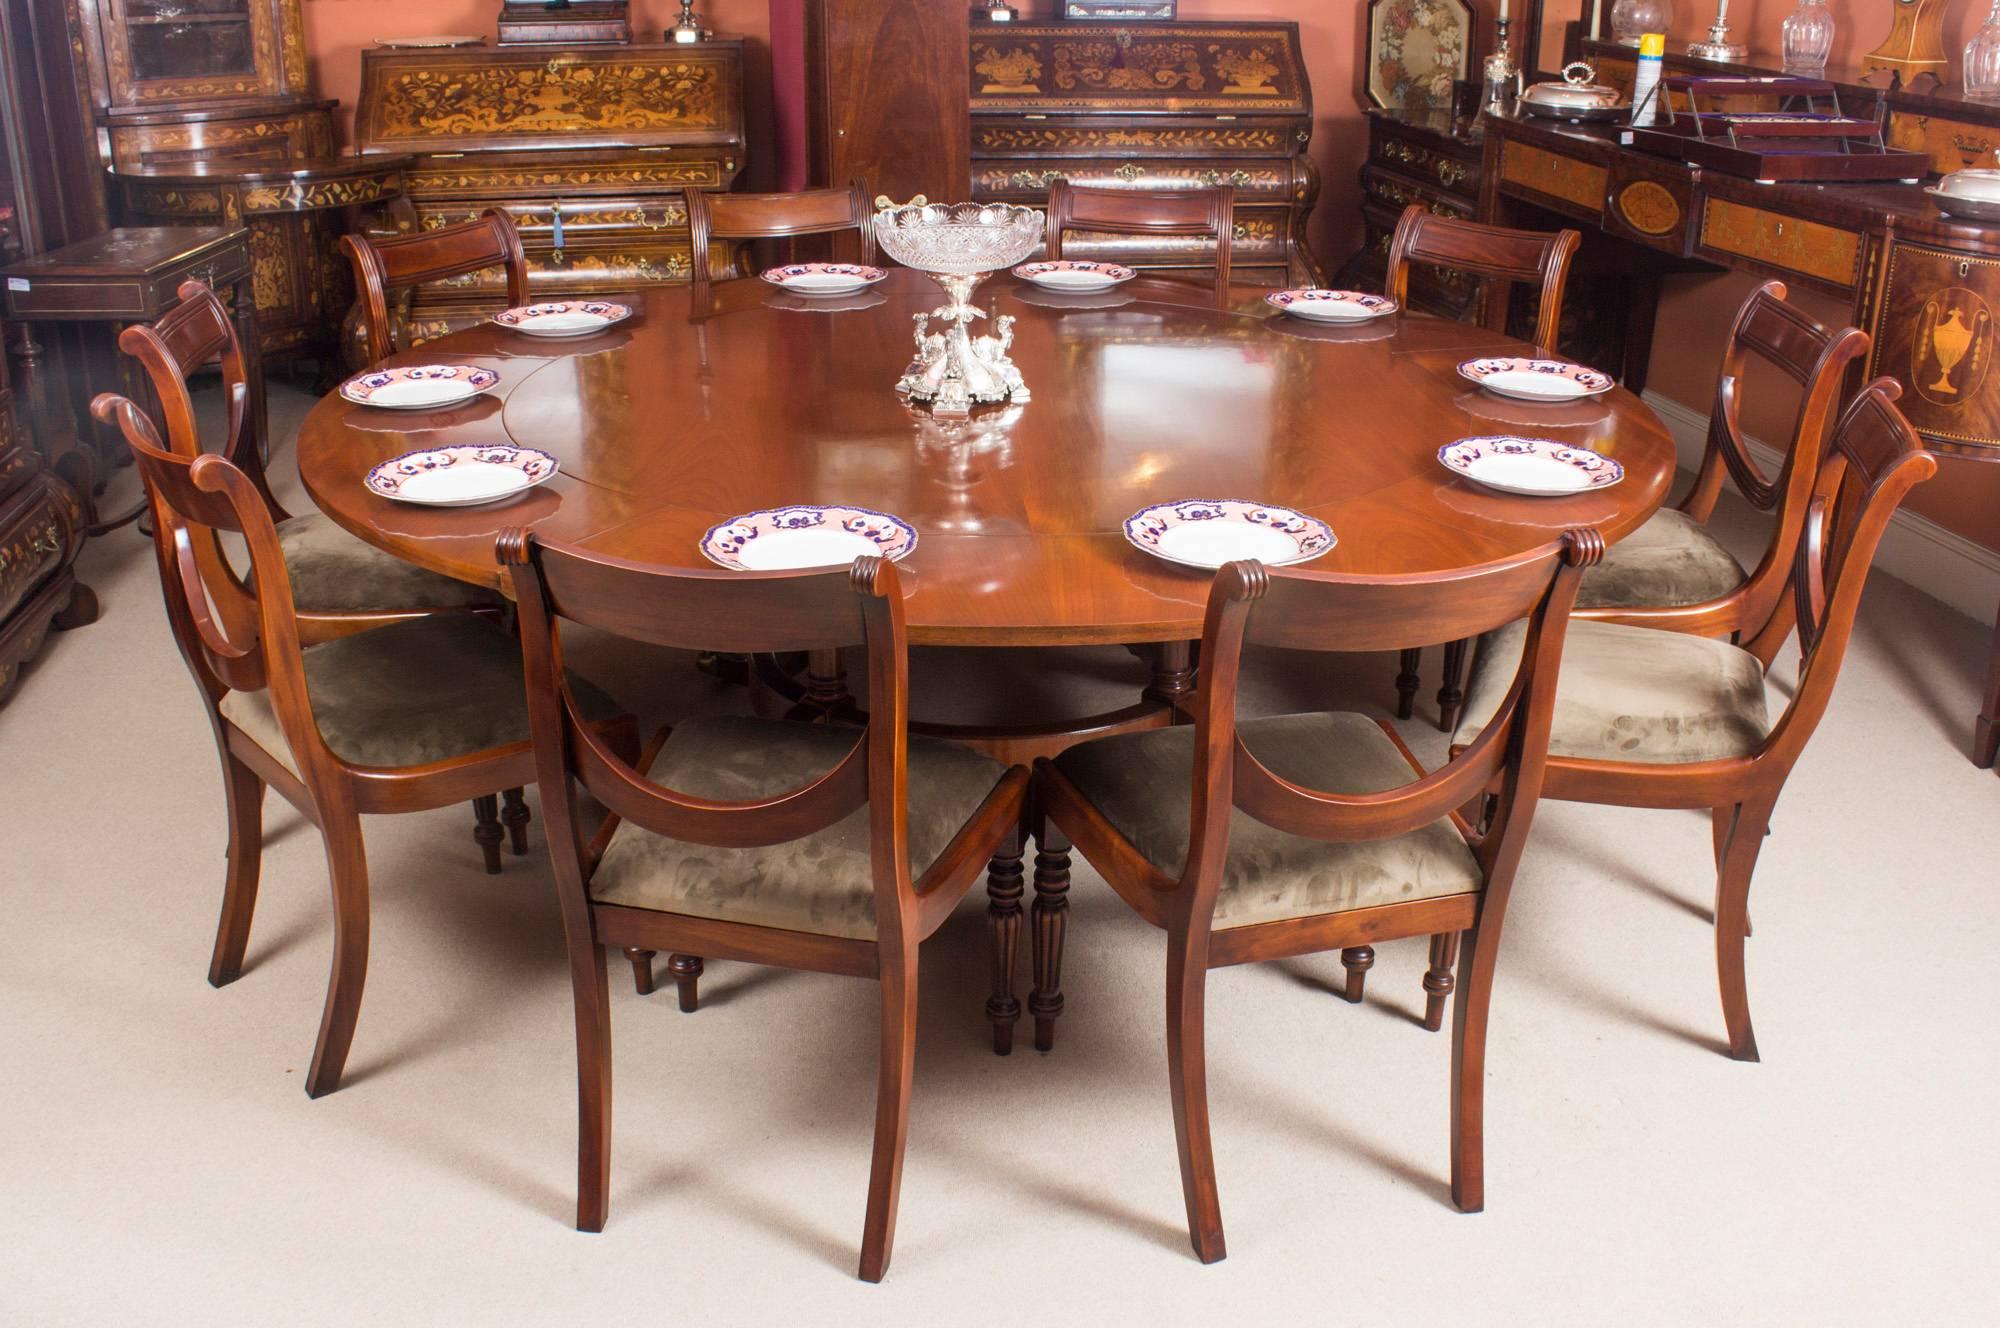 This beautiful dining set comprises a Regency Revival Jupe style dining table mid-20th century in date, with the matching set of ten Regency style dining chairs.

The table has a solid mahogany top that has five additional leaves that can be added